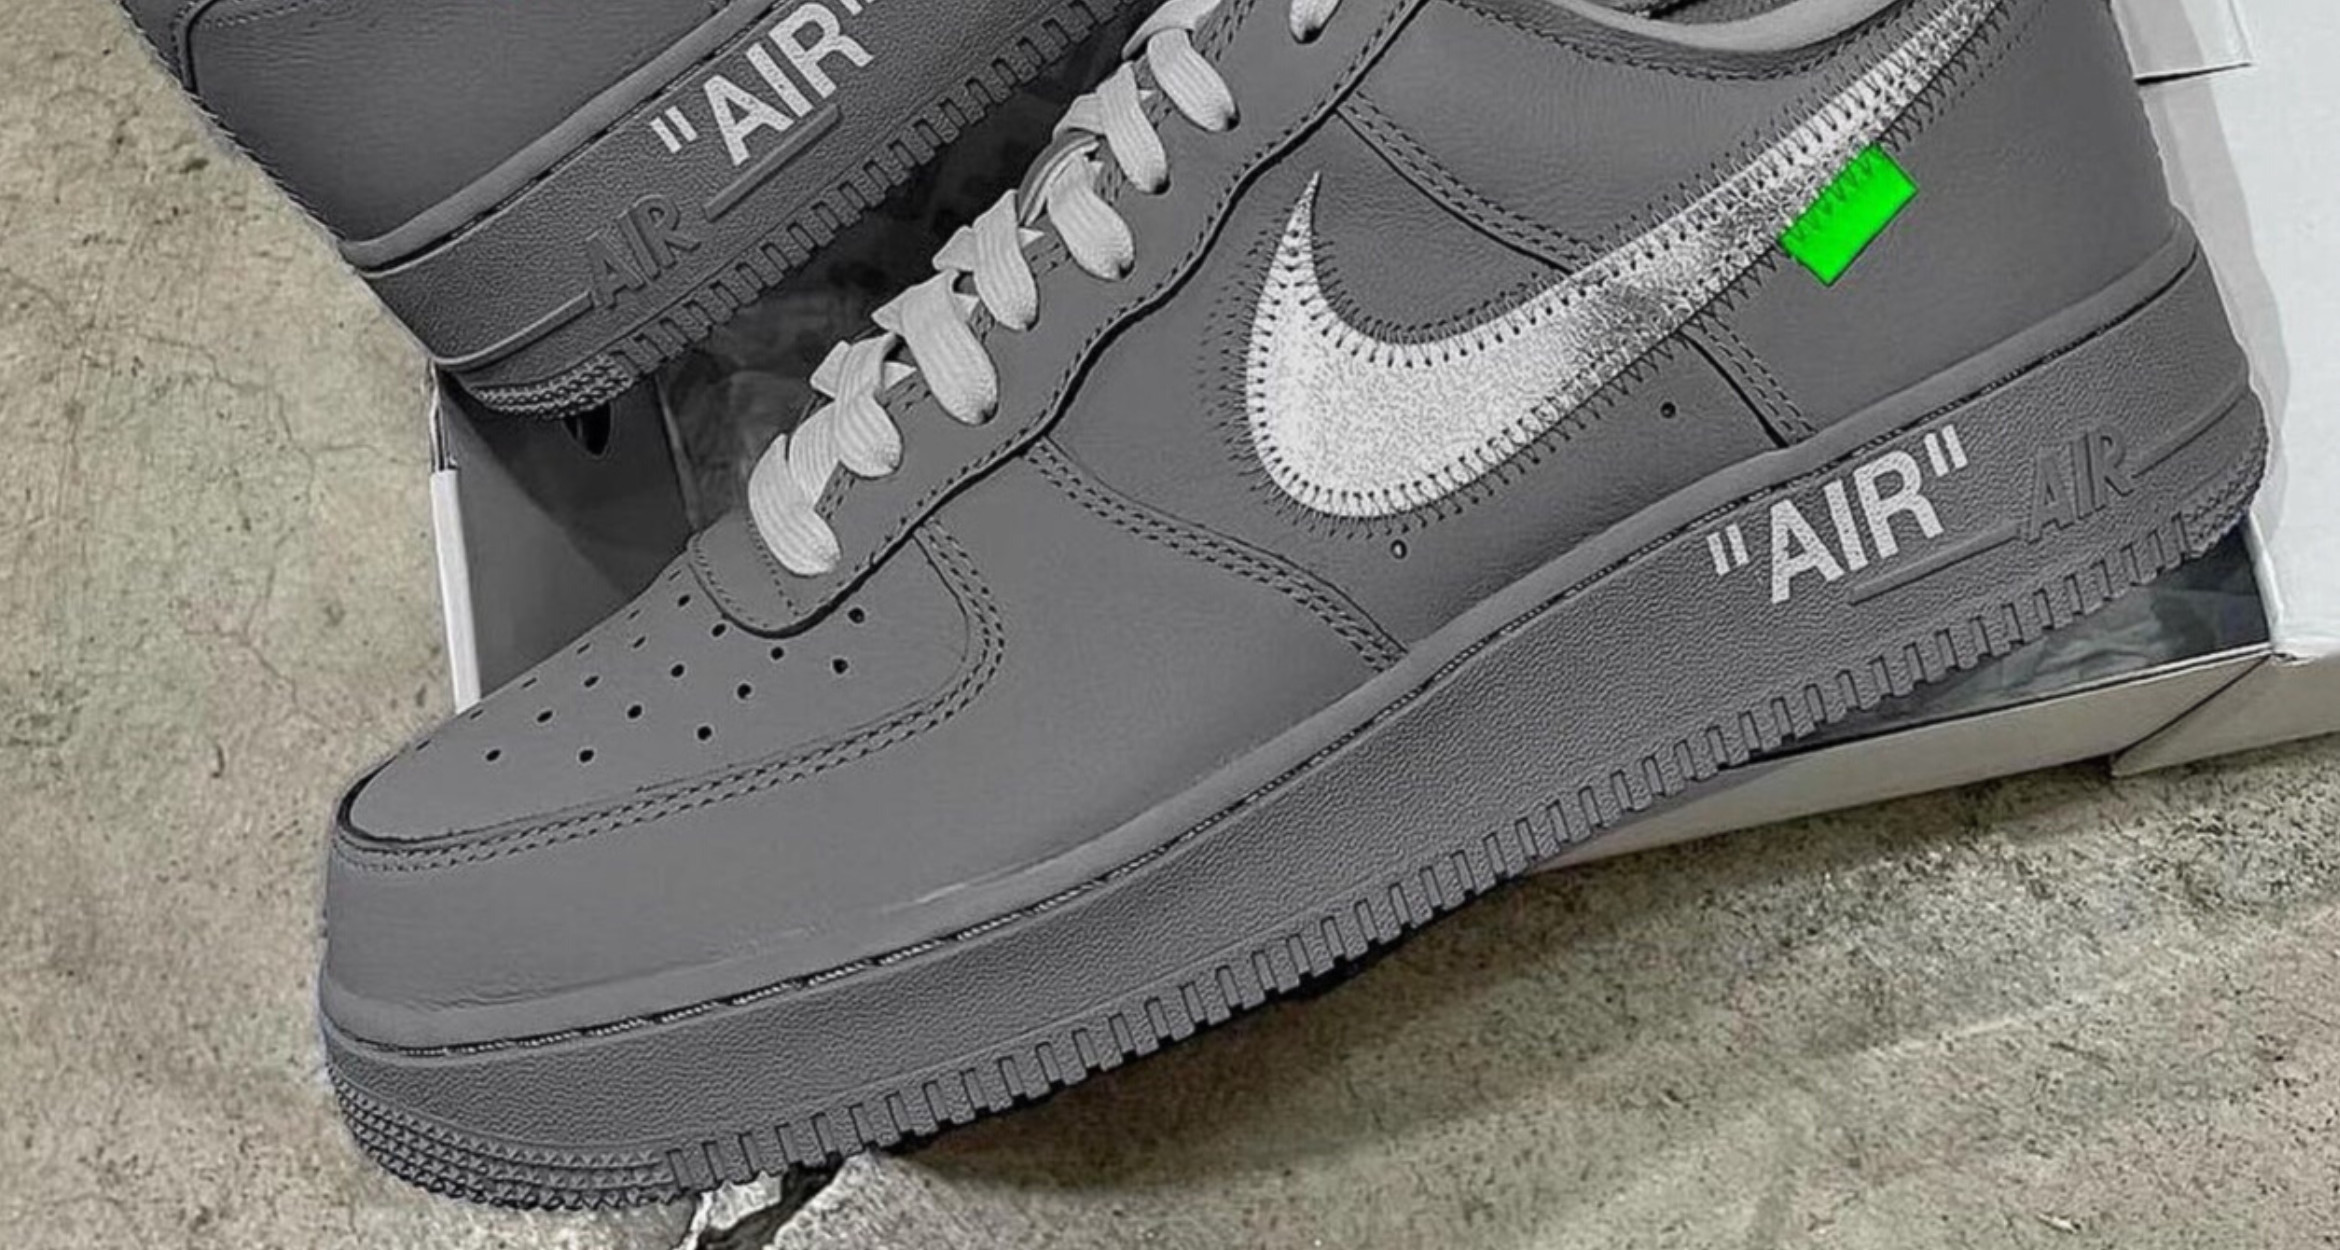 The Off-White x Nike Air Force 1 Low Grey Is Rumoured to Release